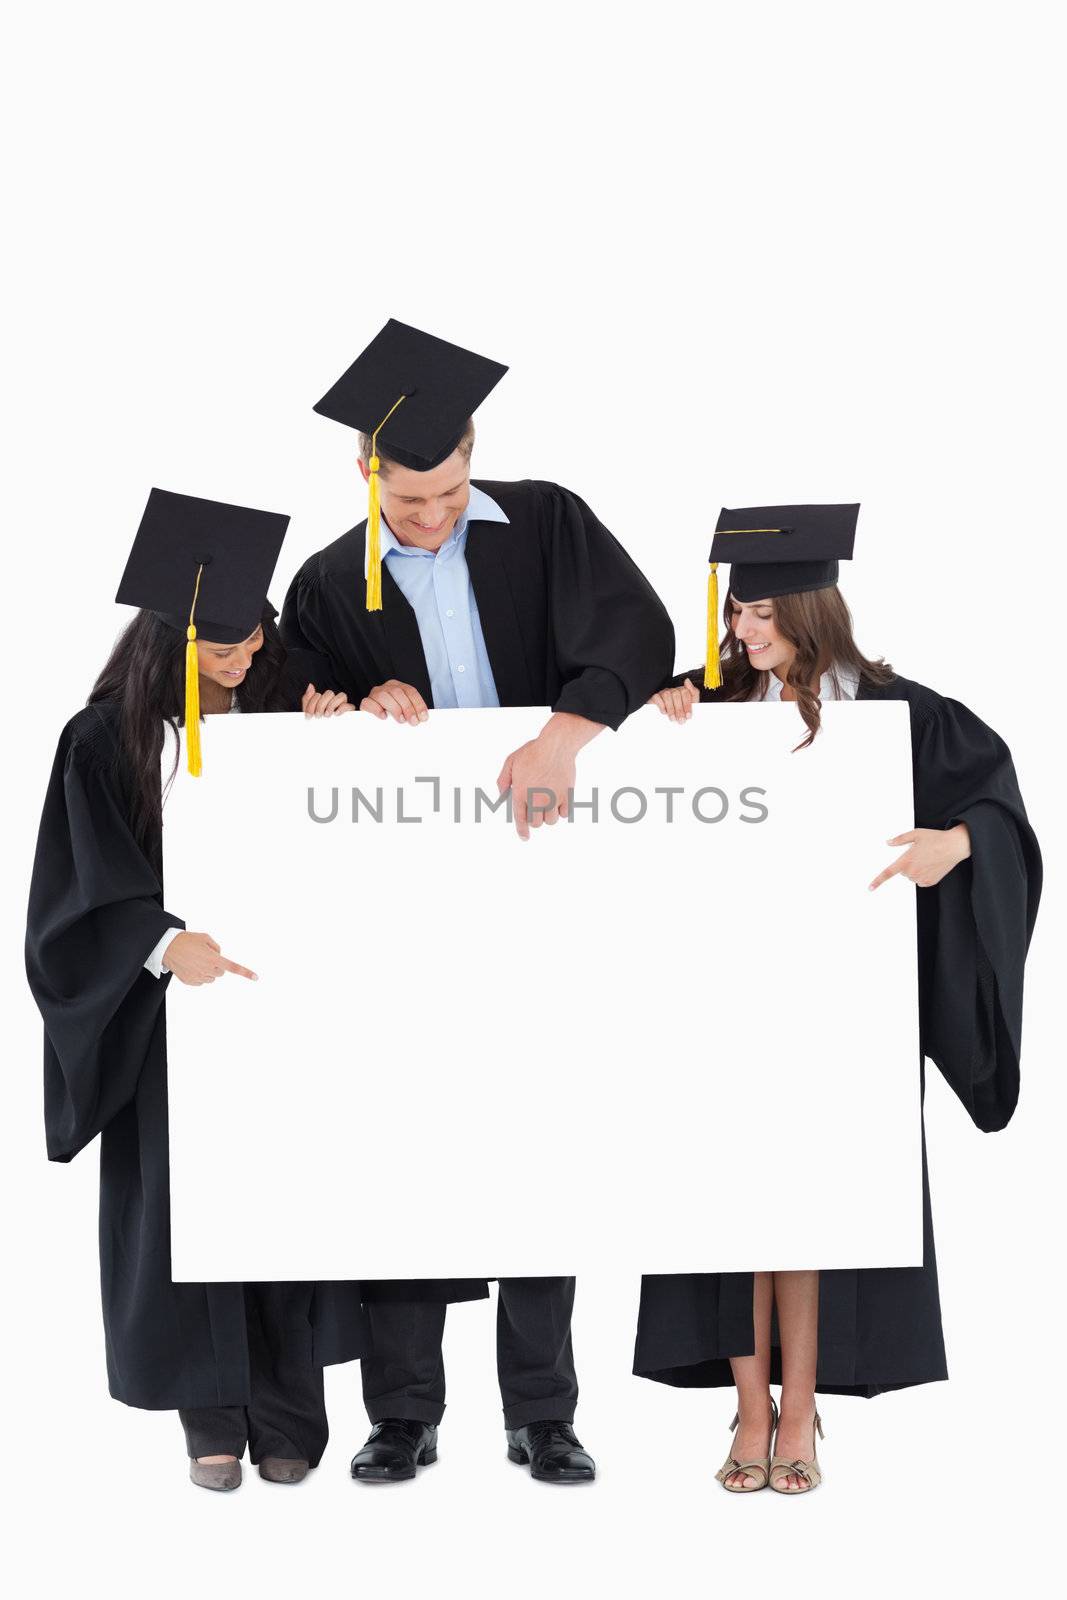 Three graduates point to a spot on the balank sign which will be filled by infromation